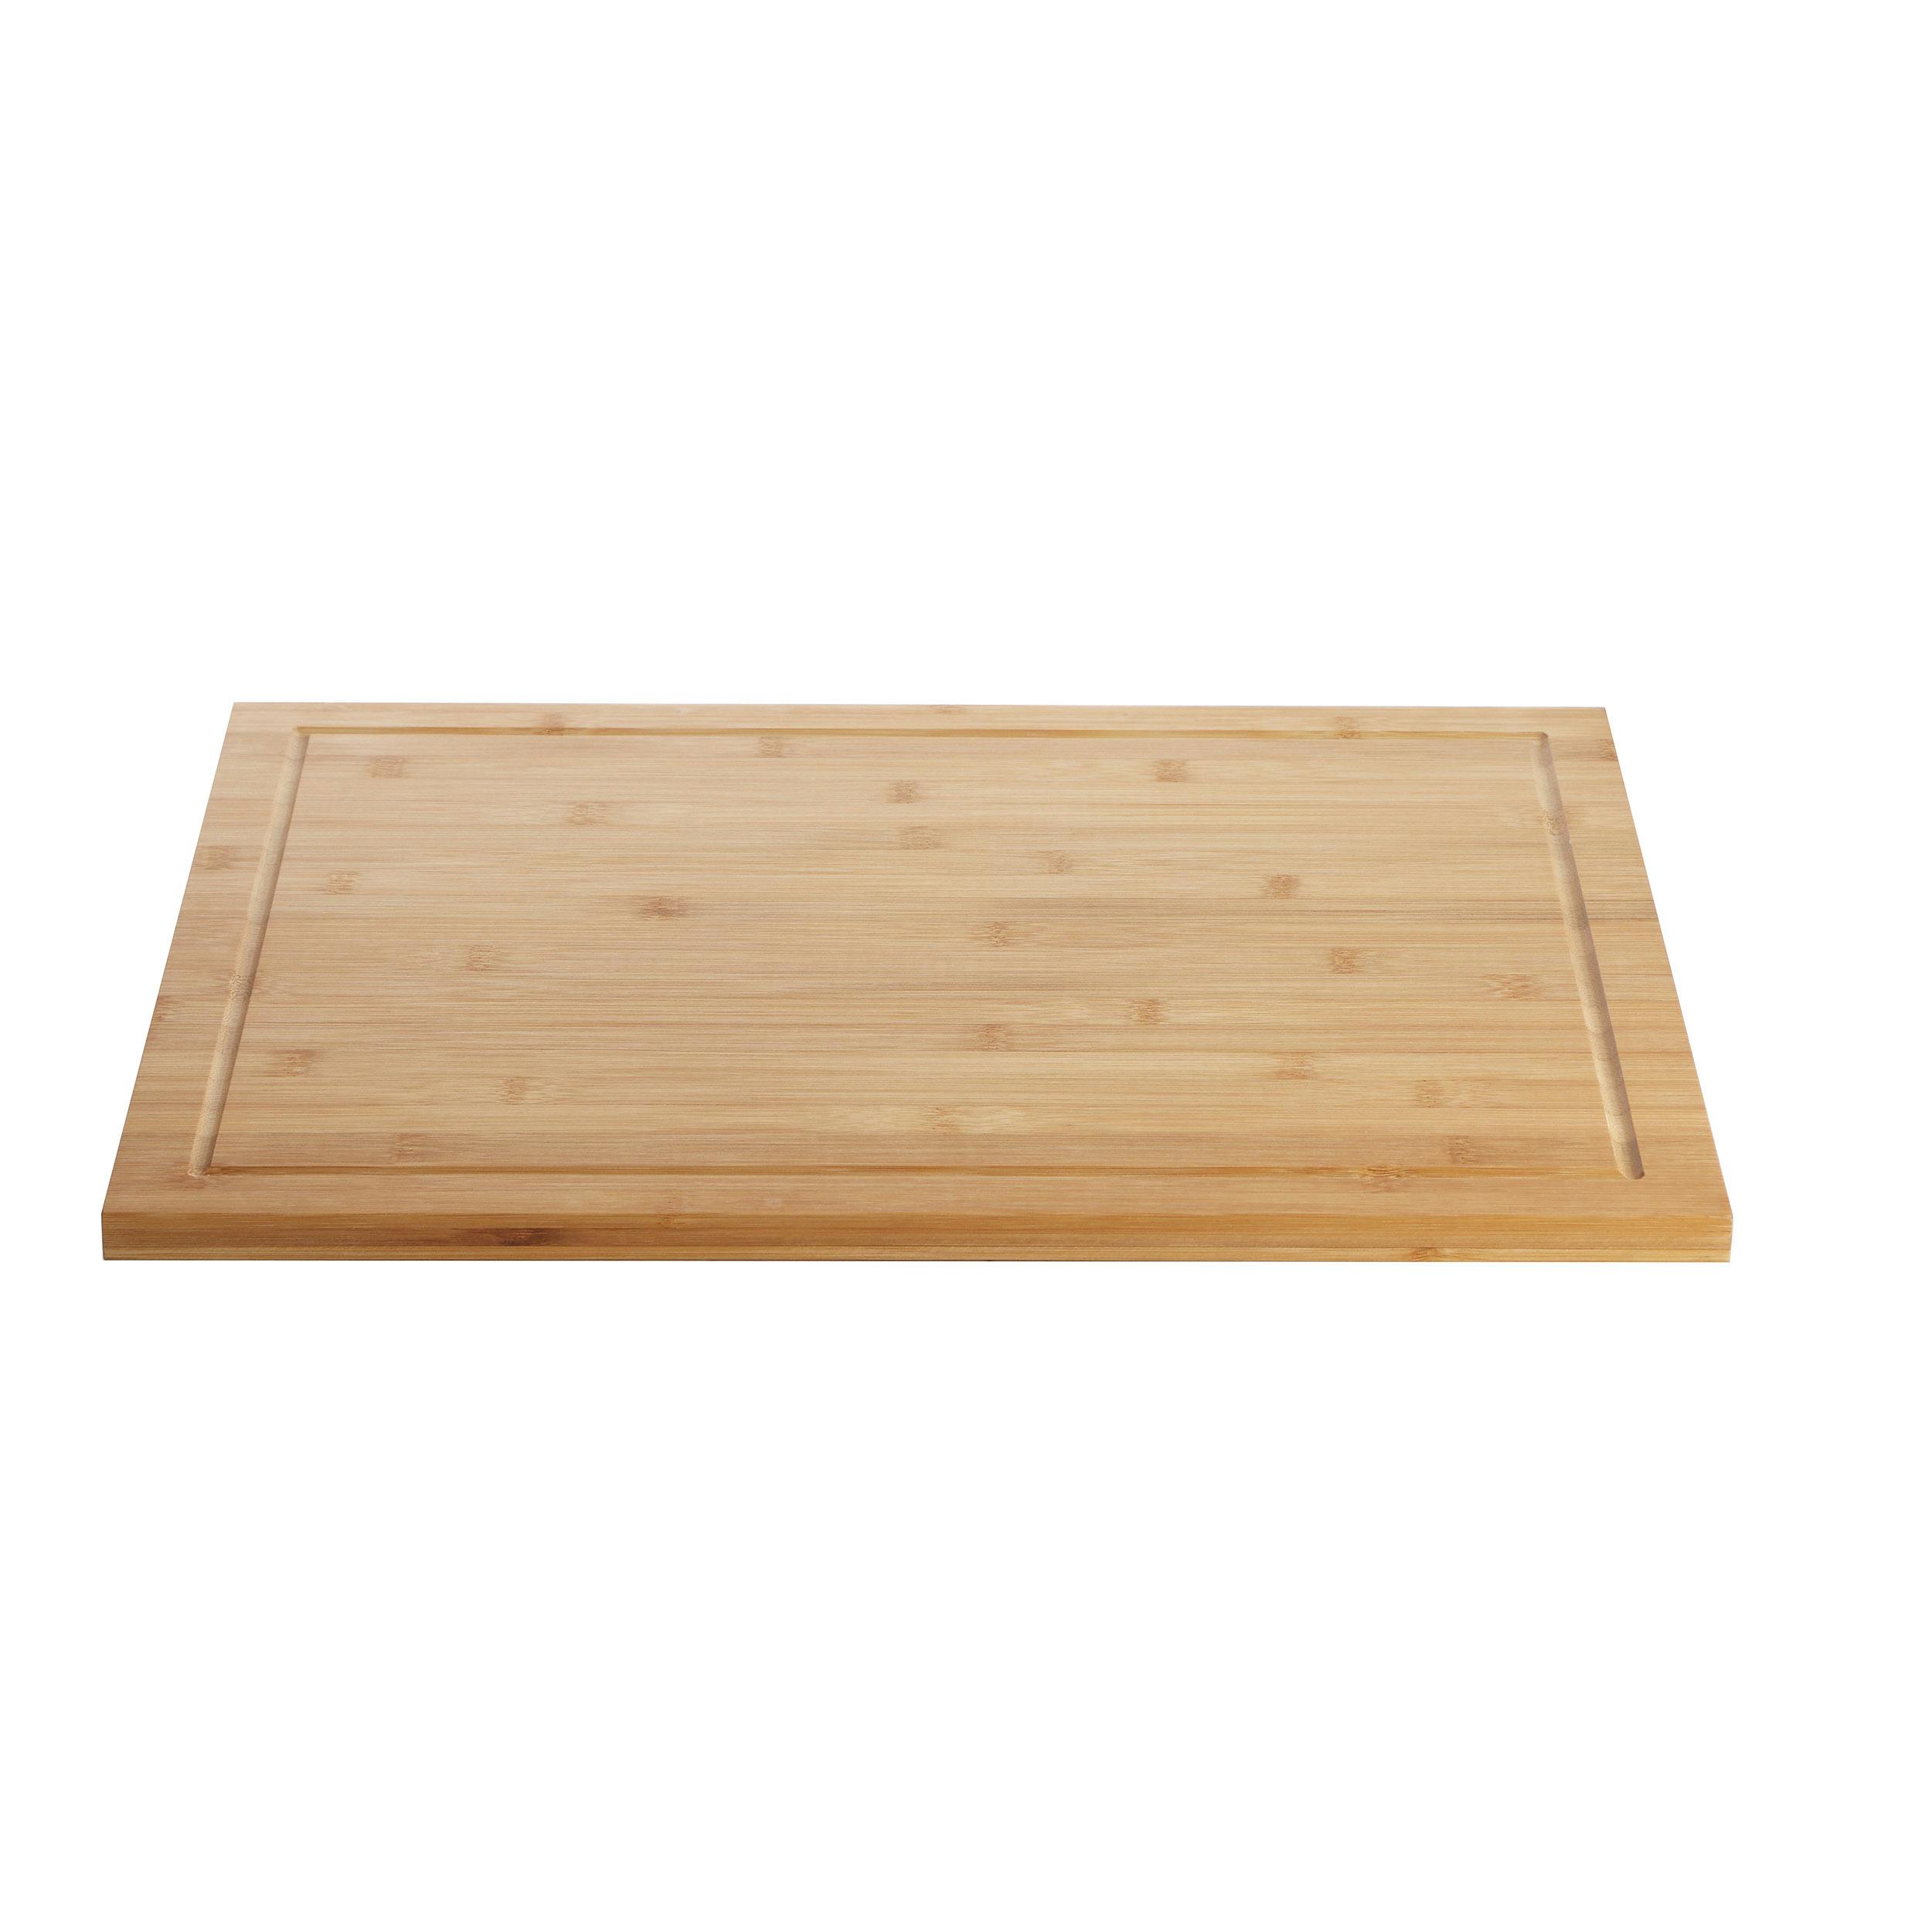 Kitchen Cutting Board Made Of Bamboo Wood 100% With Groove 32x25.5